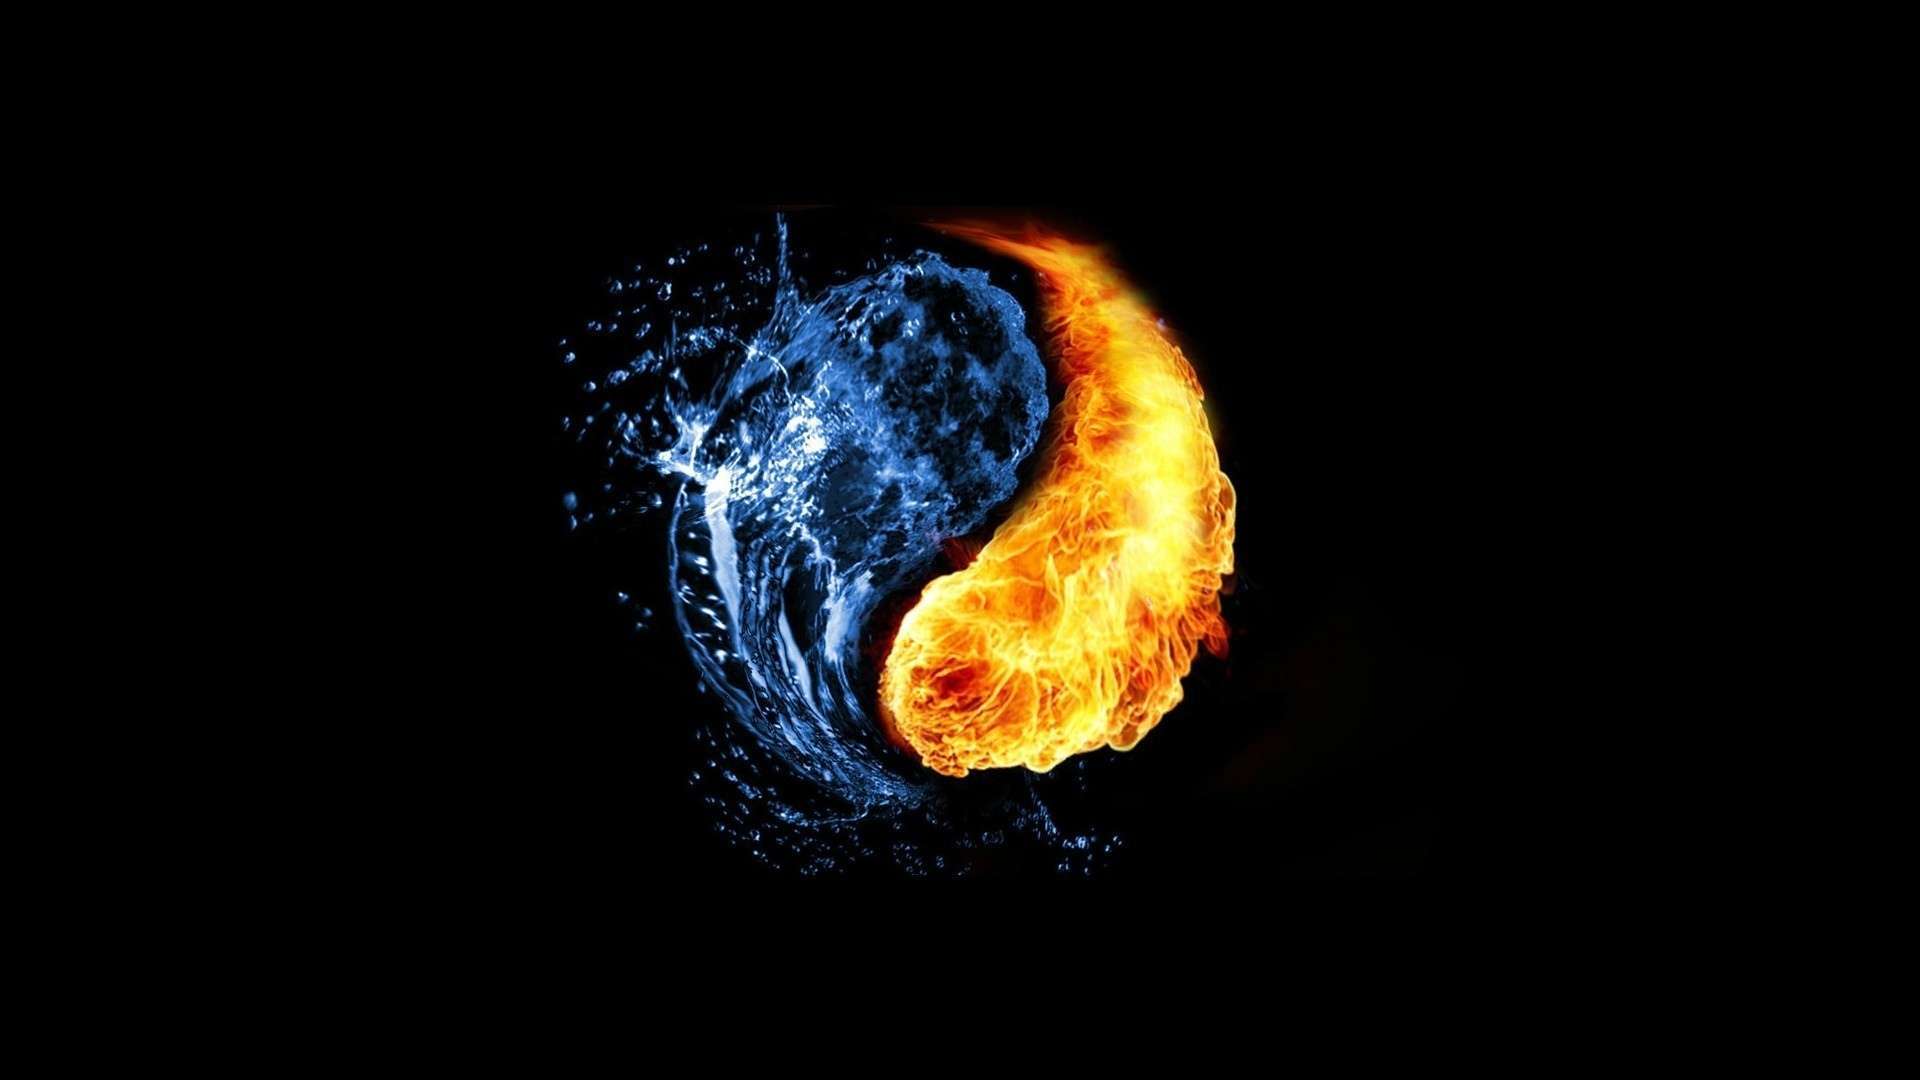 Fire And Ice wallpaper, Abstract, HQ Fire And Ice pictureK